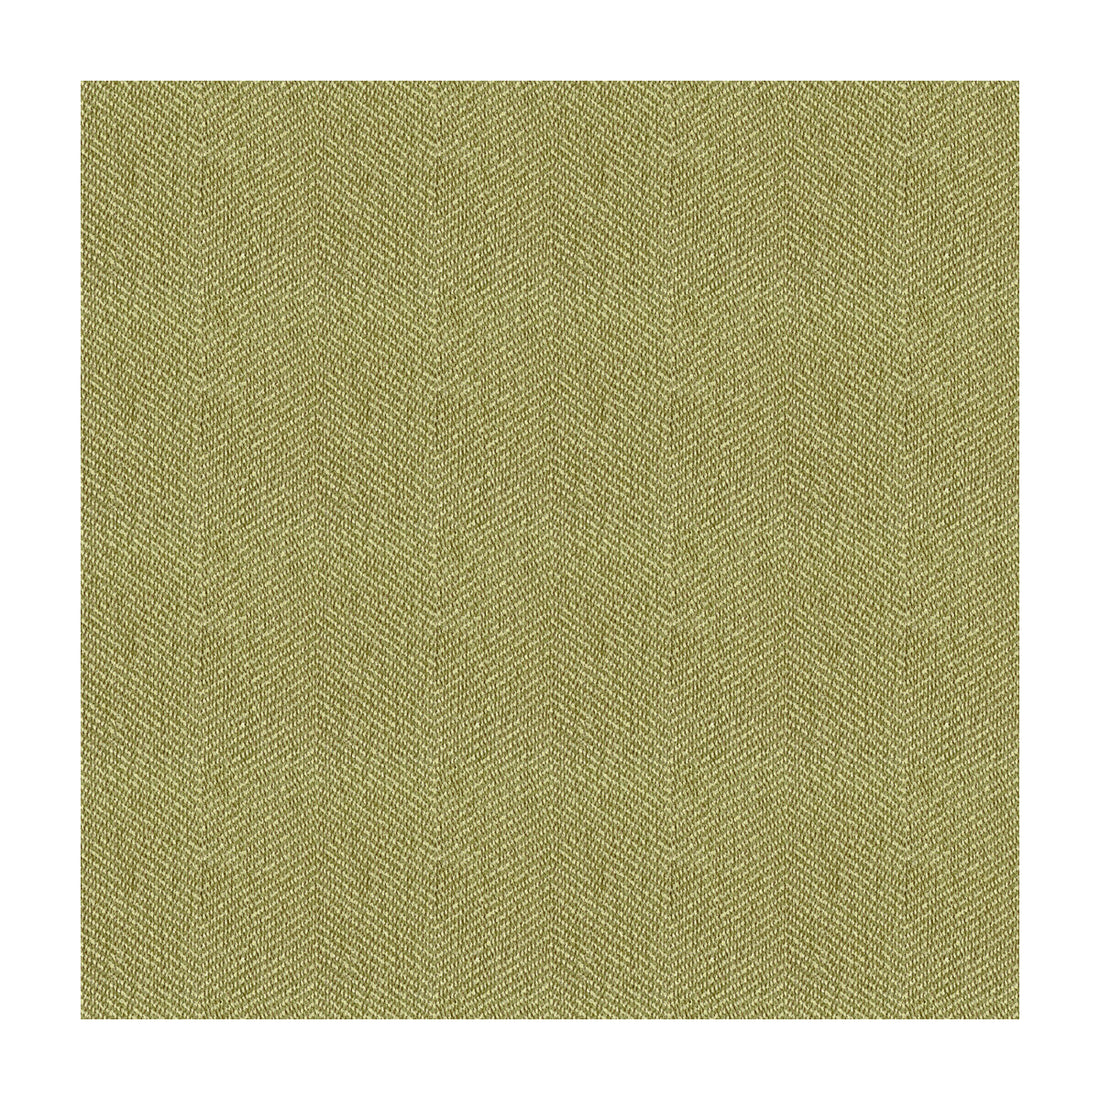 Kravet Smart fabric in 33832-3 color - pattern 33832.3.0 - by Kravet Smart in the Performance Crypton Home collection